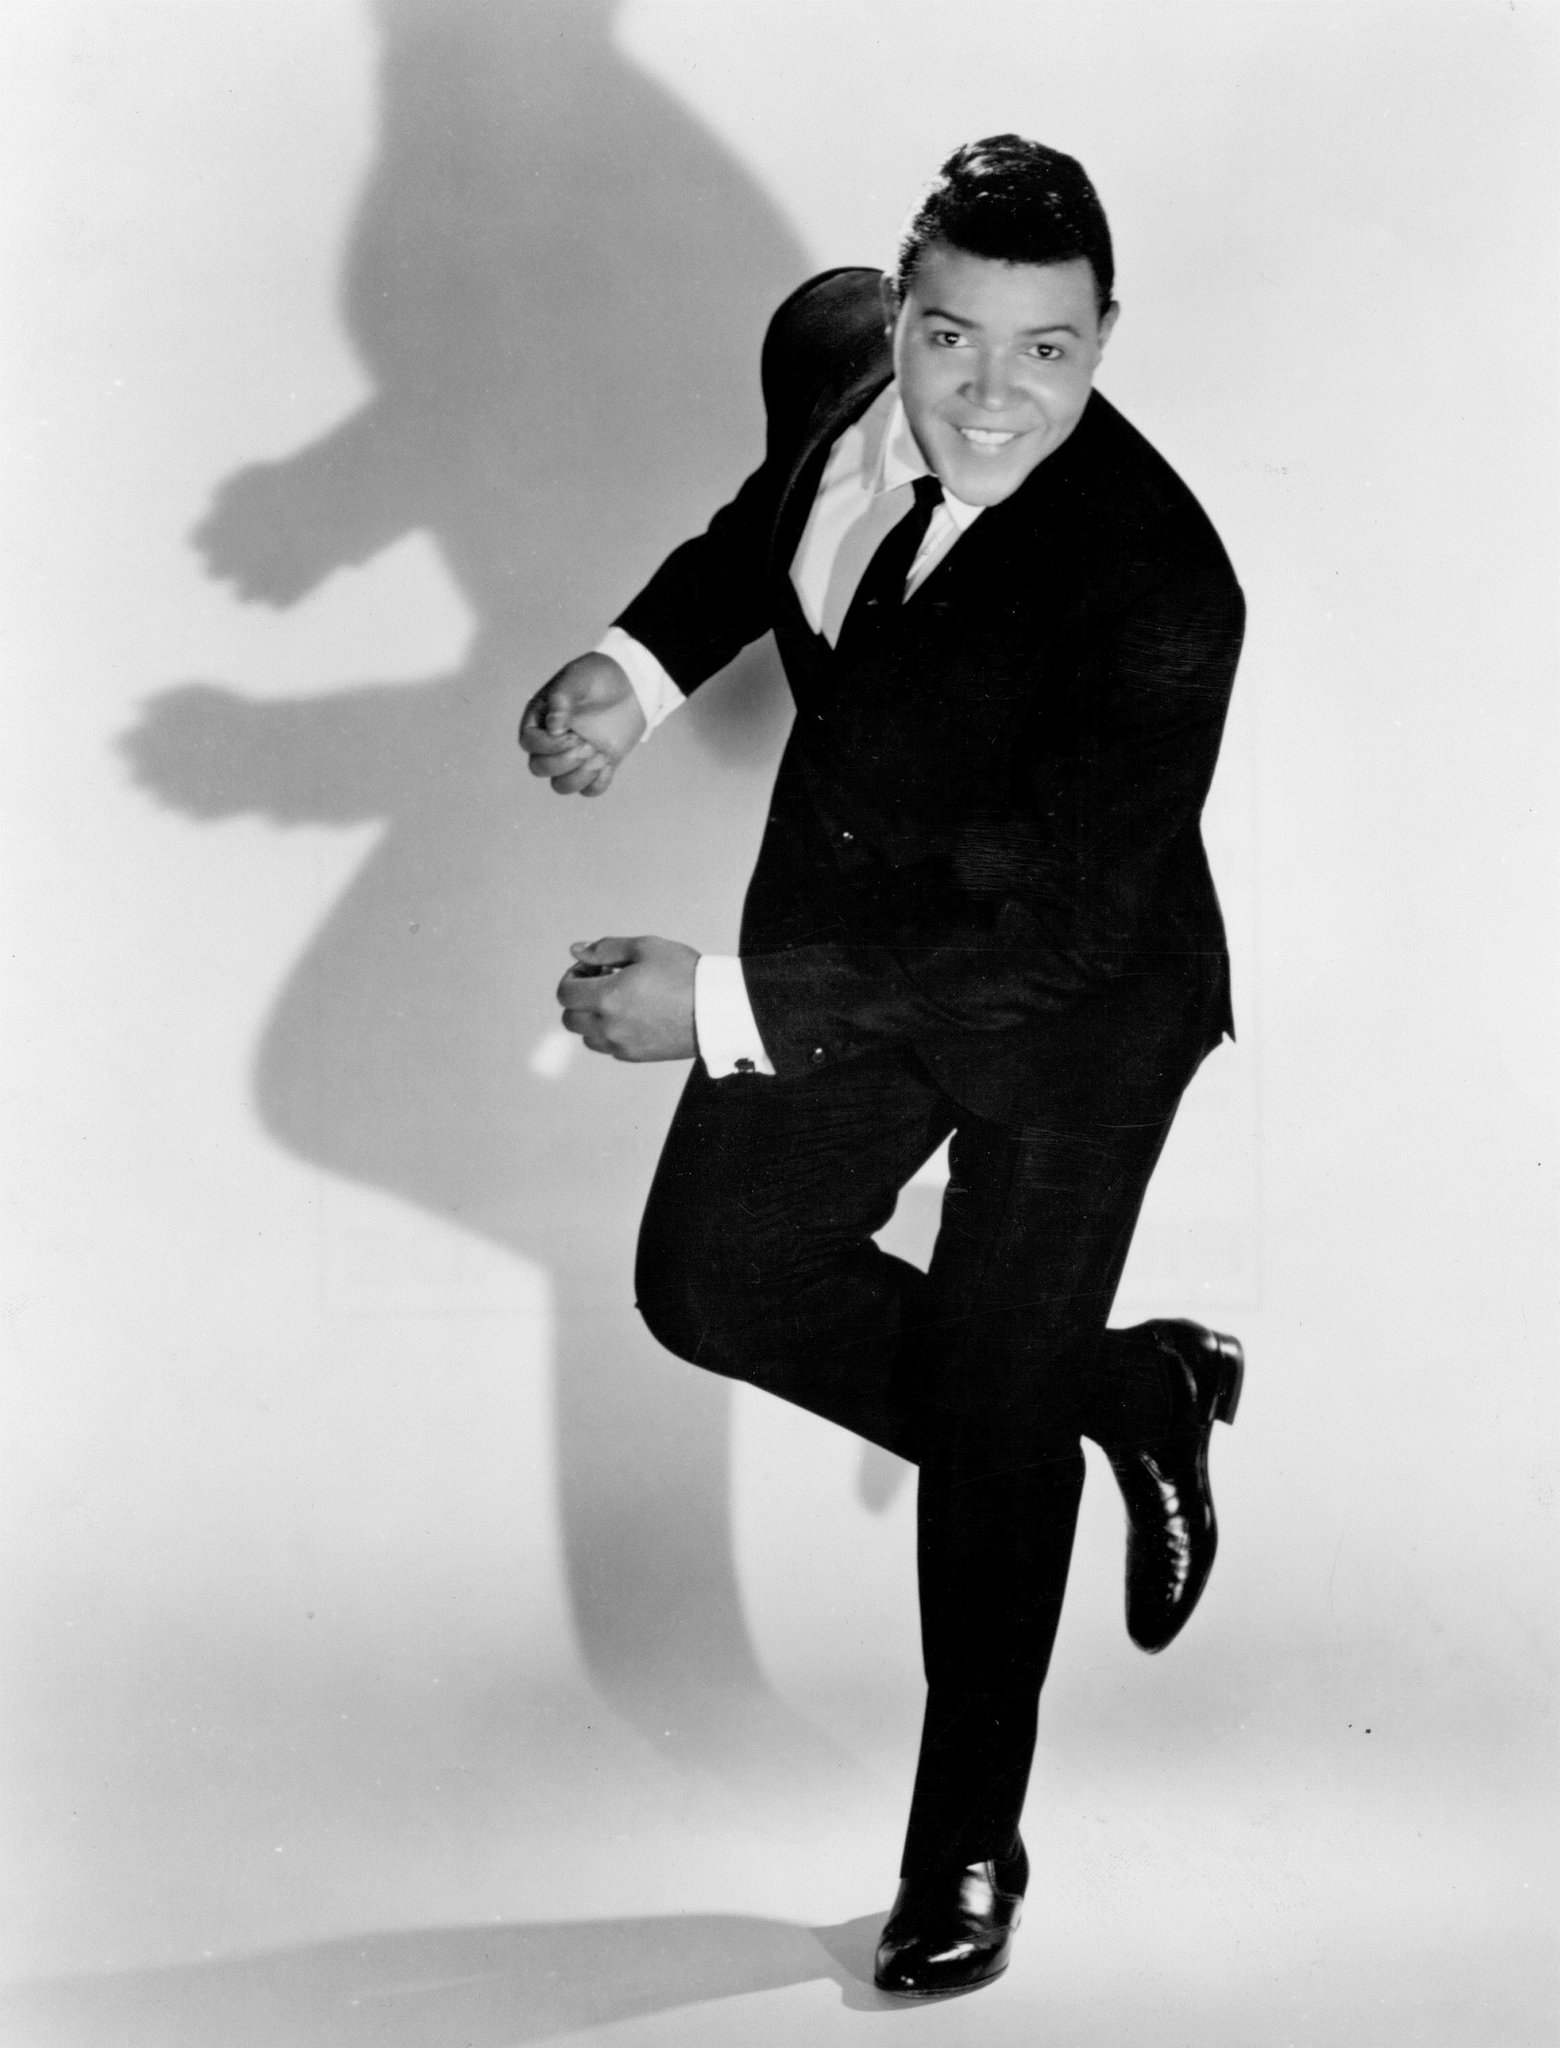 Happy Birthday to Chubby Checker, who turns 76 today! 